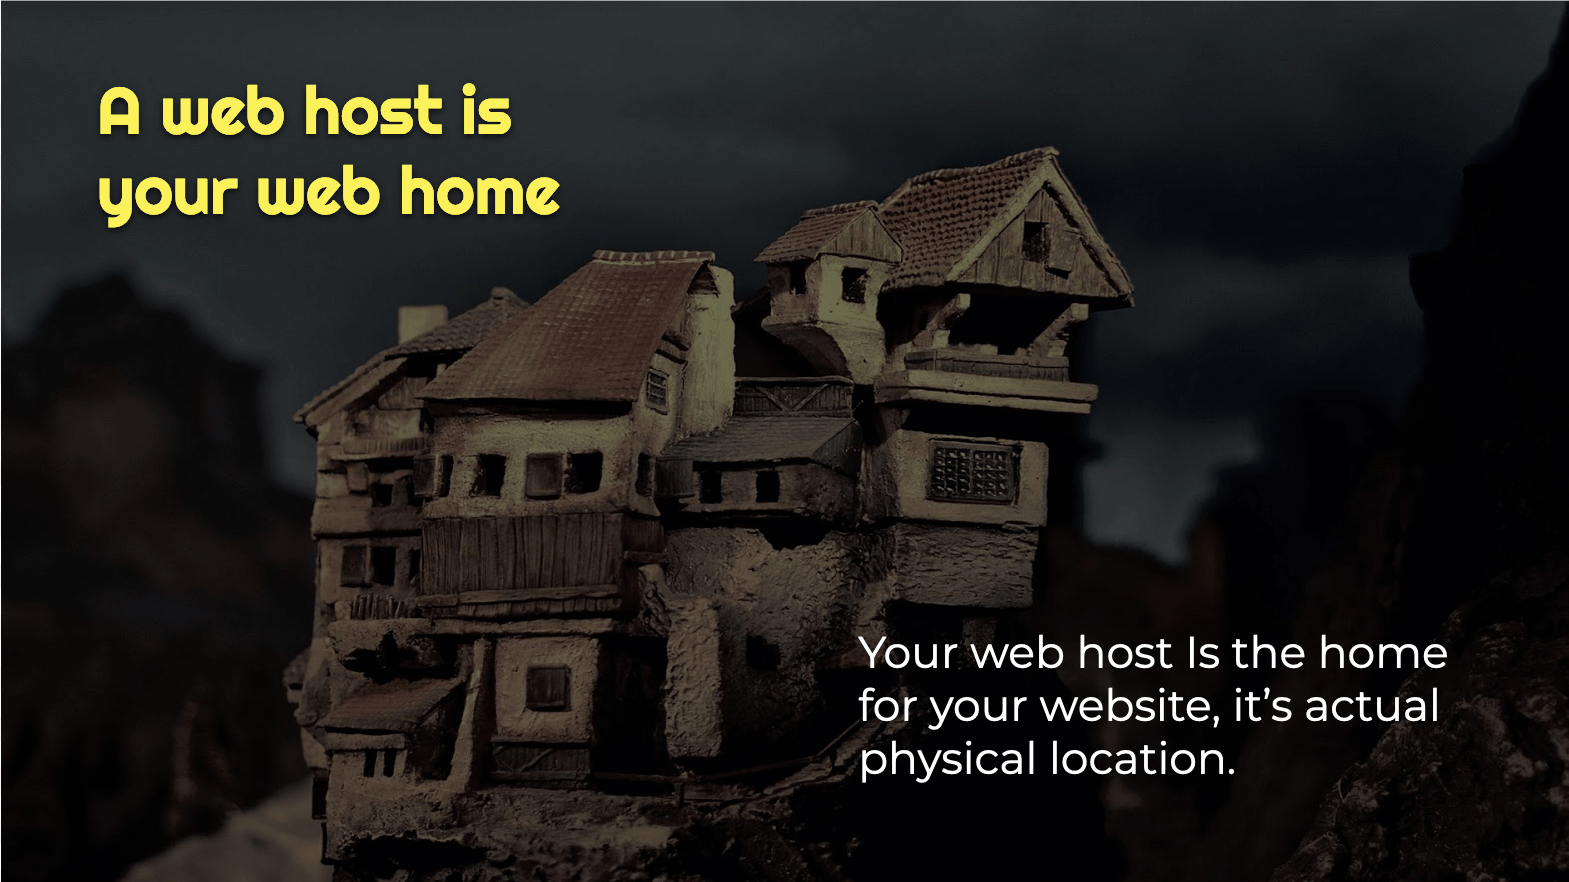 image of cozy home to represent the web host as physical home for site